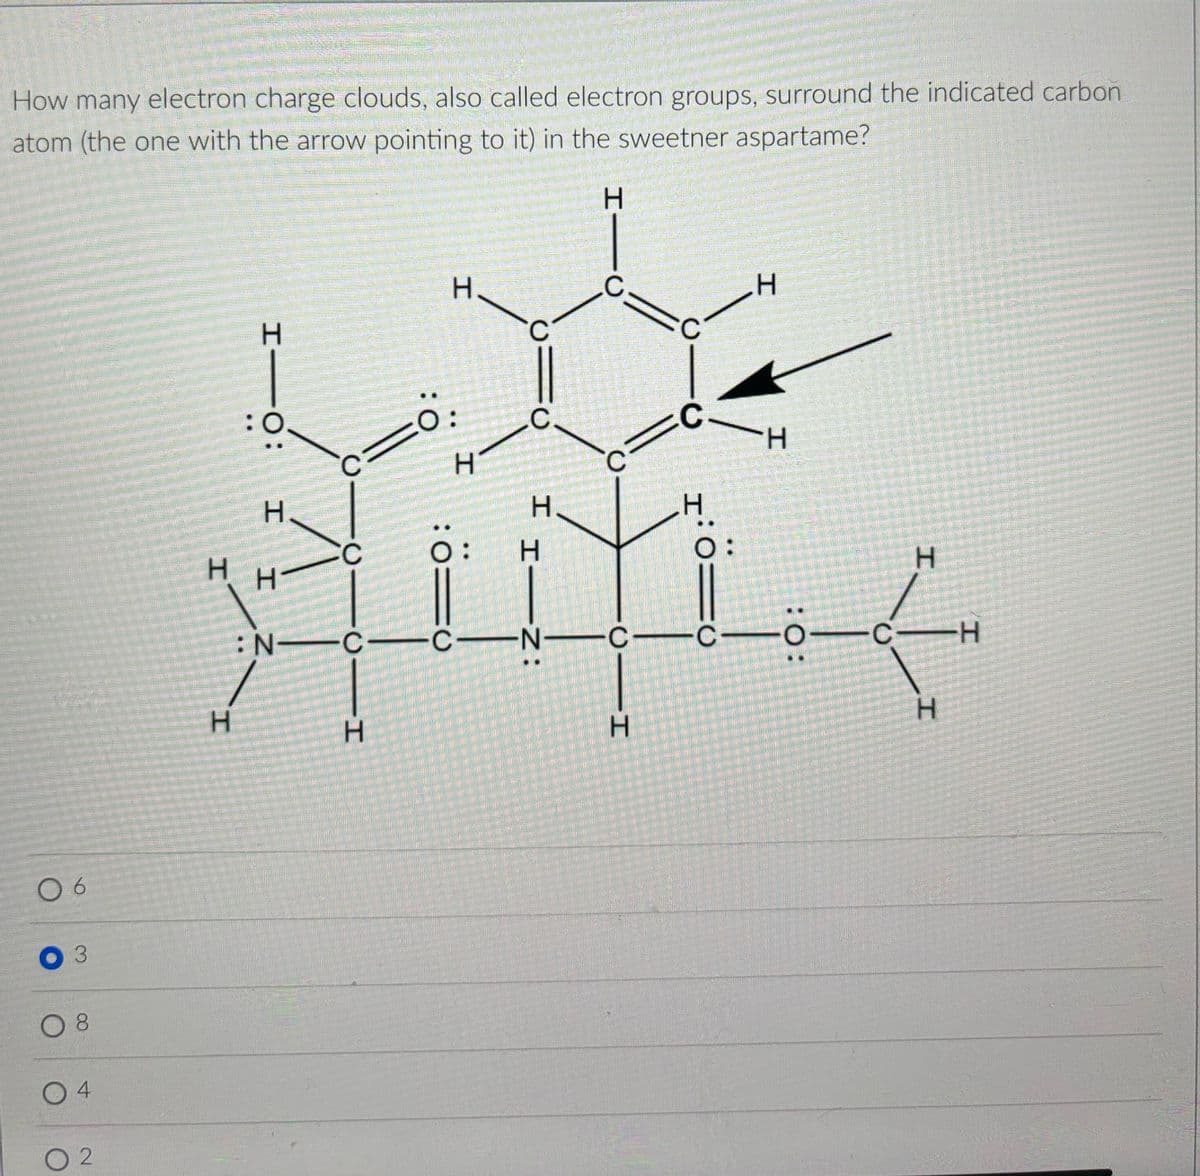 How many electron charge clouds, also called electron groups, surround the indicated carbon
atom (the one with the arrow pointing to it) in the sweetner aspartame?
06
3
○ 8
4
02
:0
I I : 0-1
H
C
H
C
H-
N
C
H
H
H
HIC
H
C
C
0:
C
C
H
H
H
H
Н.
:=
: 0=0
H―Z:
O
CIN C-C-
:0:
H
H
-C-
H
H